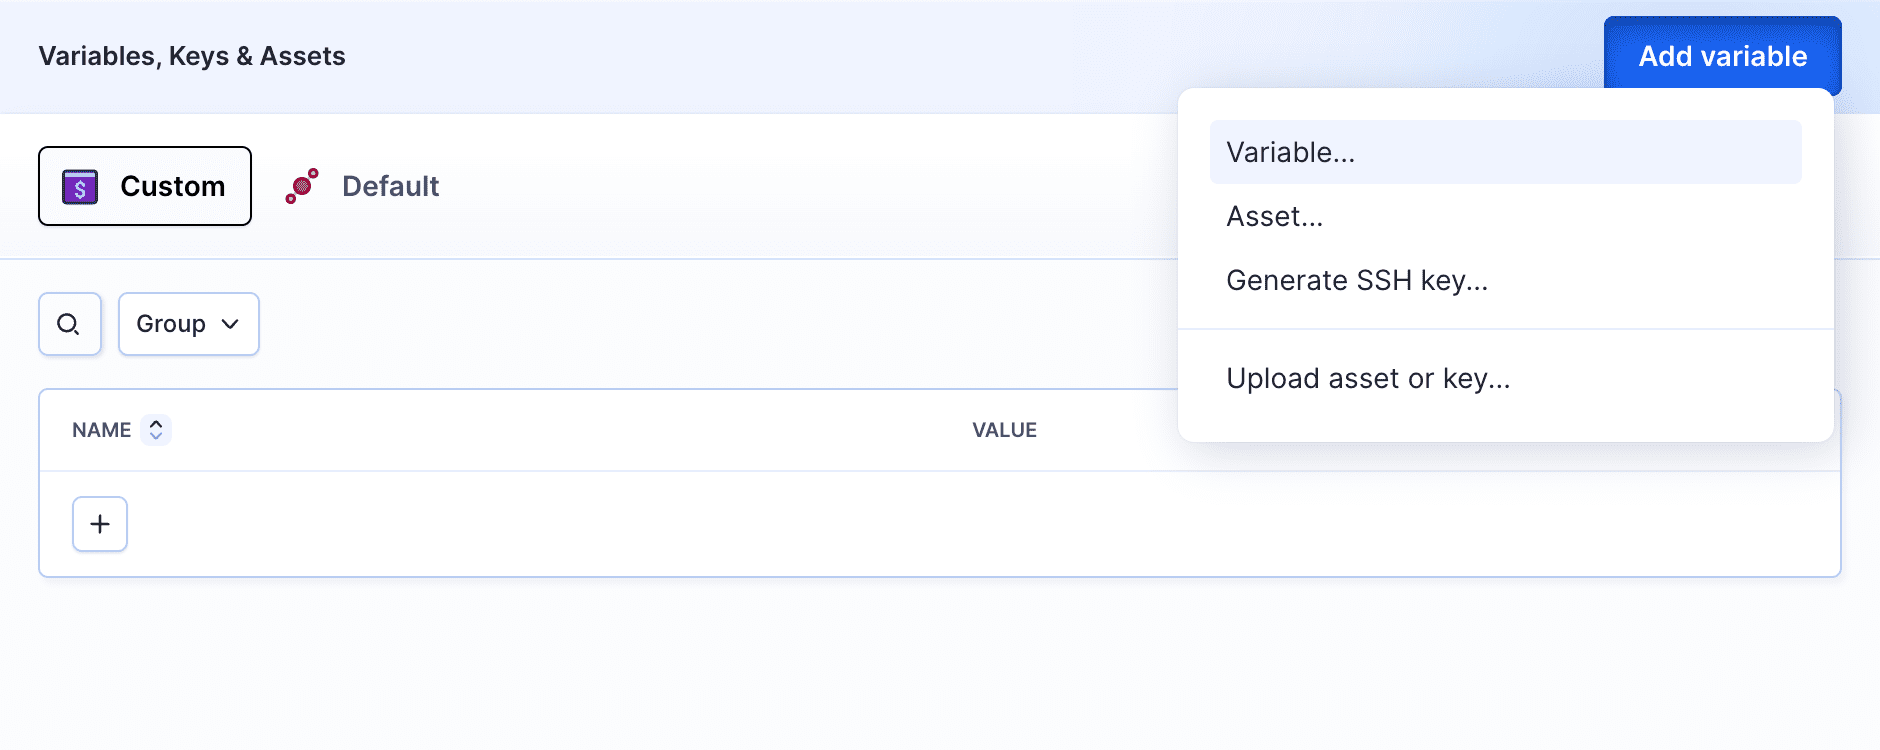 Adding new variable